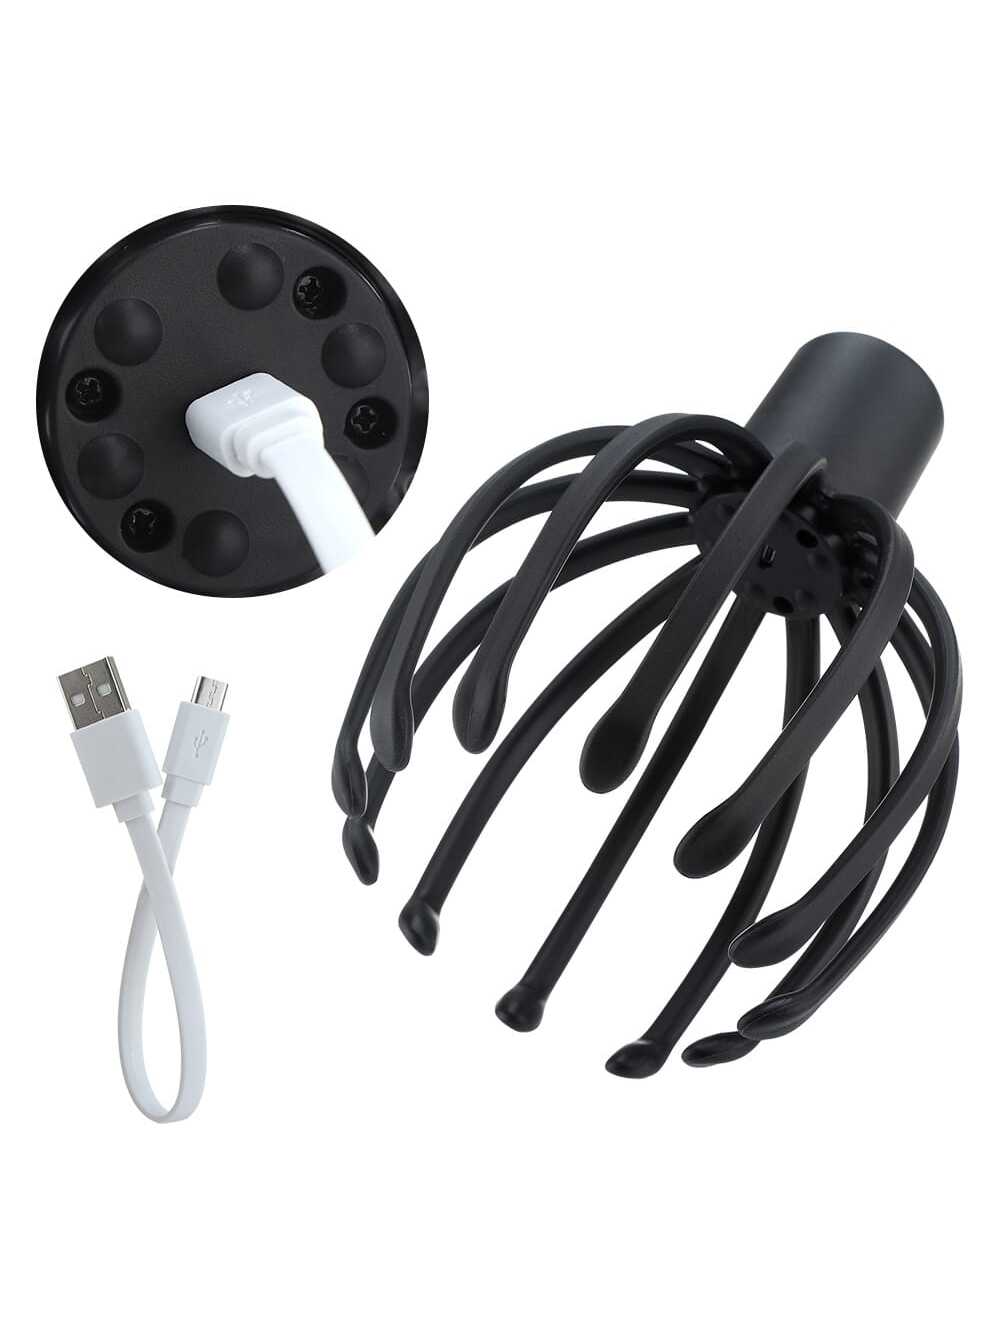 1pc Black Electric Scalp Massager Octopus Shaped Massage Claw For Head, Suitable For Home And Travel Use-Black-7